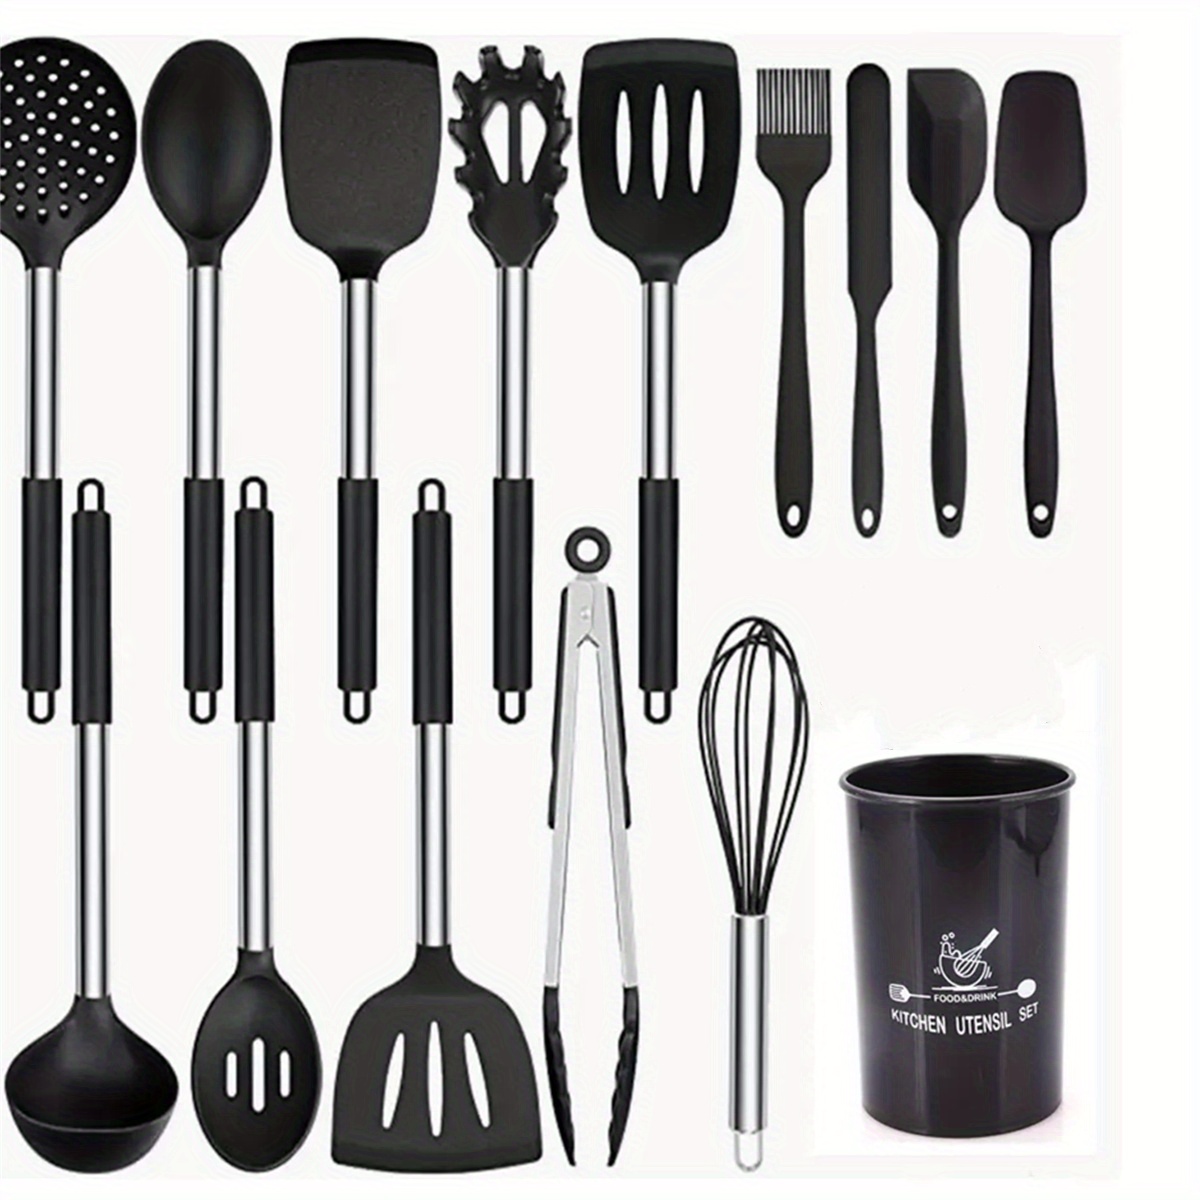 Silicone Cooking Utensils Set Heat Resistant Kitchen Utensils,Turner Tongs, Spatula,Spoon,Brush,Whisk,Kitchen Utensil Gadgets Tools Set for Nonstick  Cookware,Dishwasher Safe